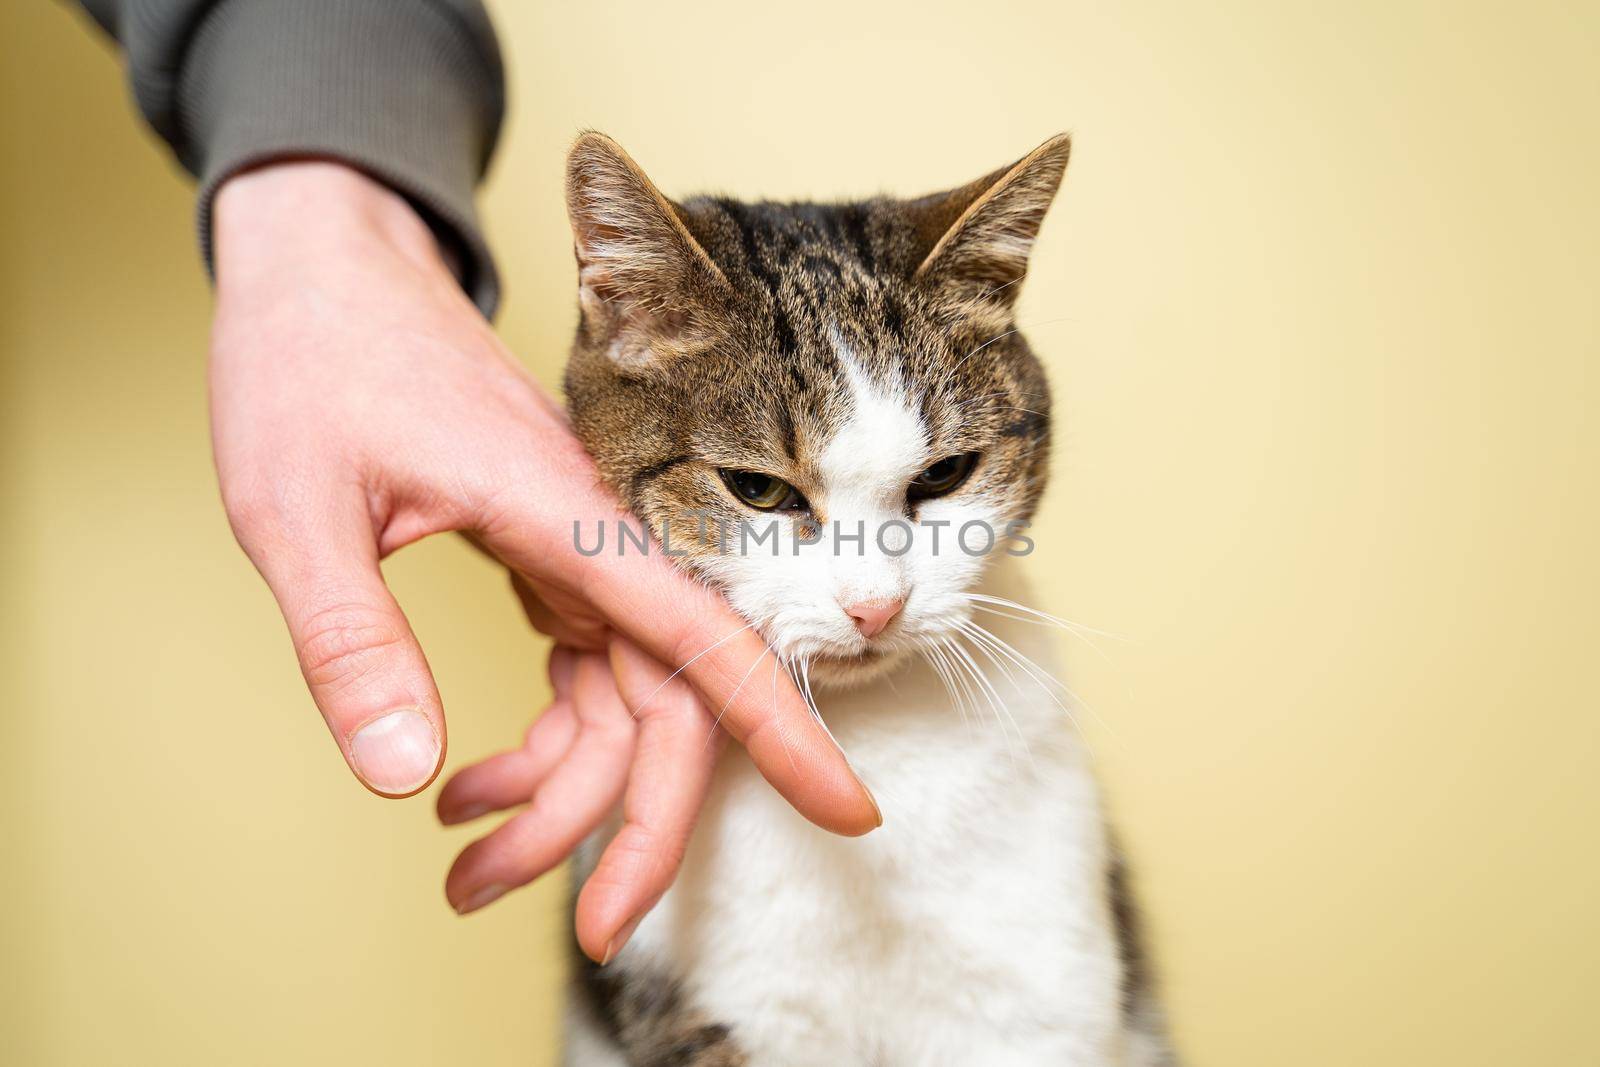 Shelter for animals concept. Caring for pets. Volunteer petting and caressing a stray cat in an animal shelter on a yellow background. Concept of volunteering. Volunteer organization for poor animals by Tomashevska